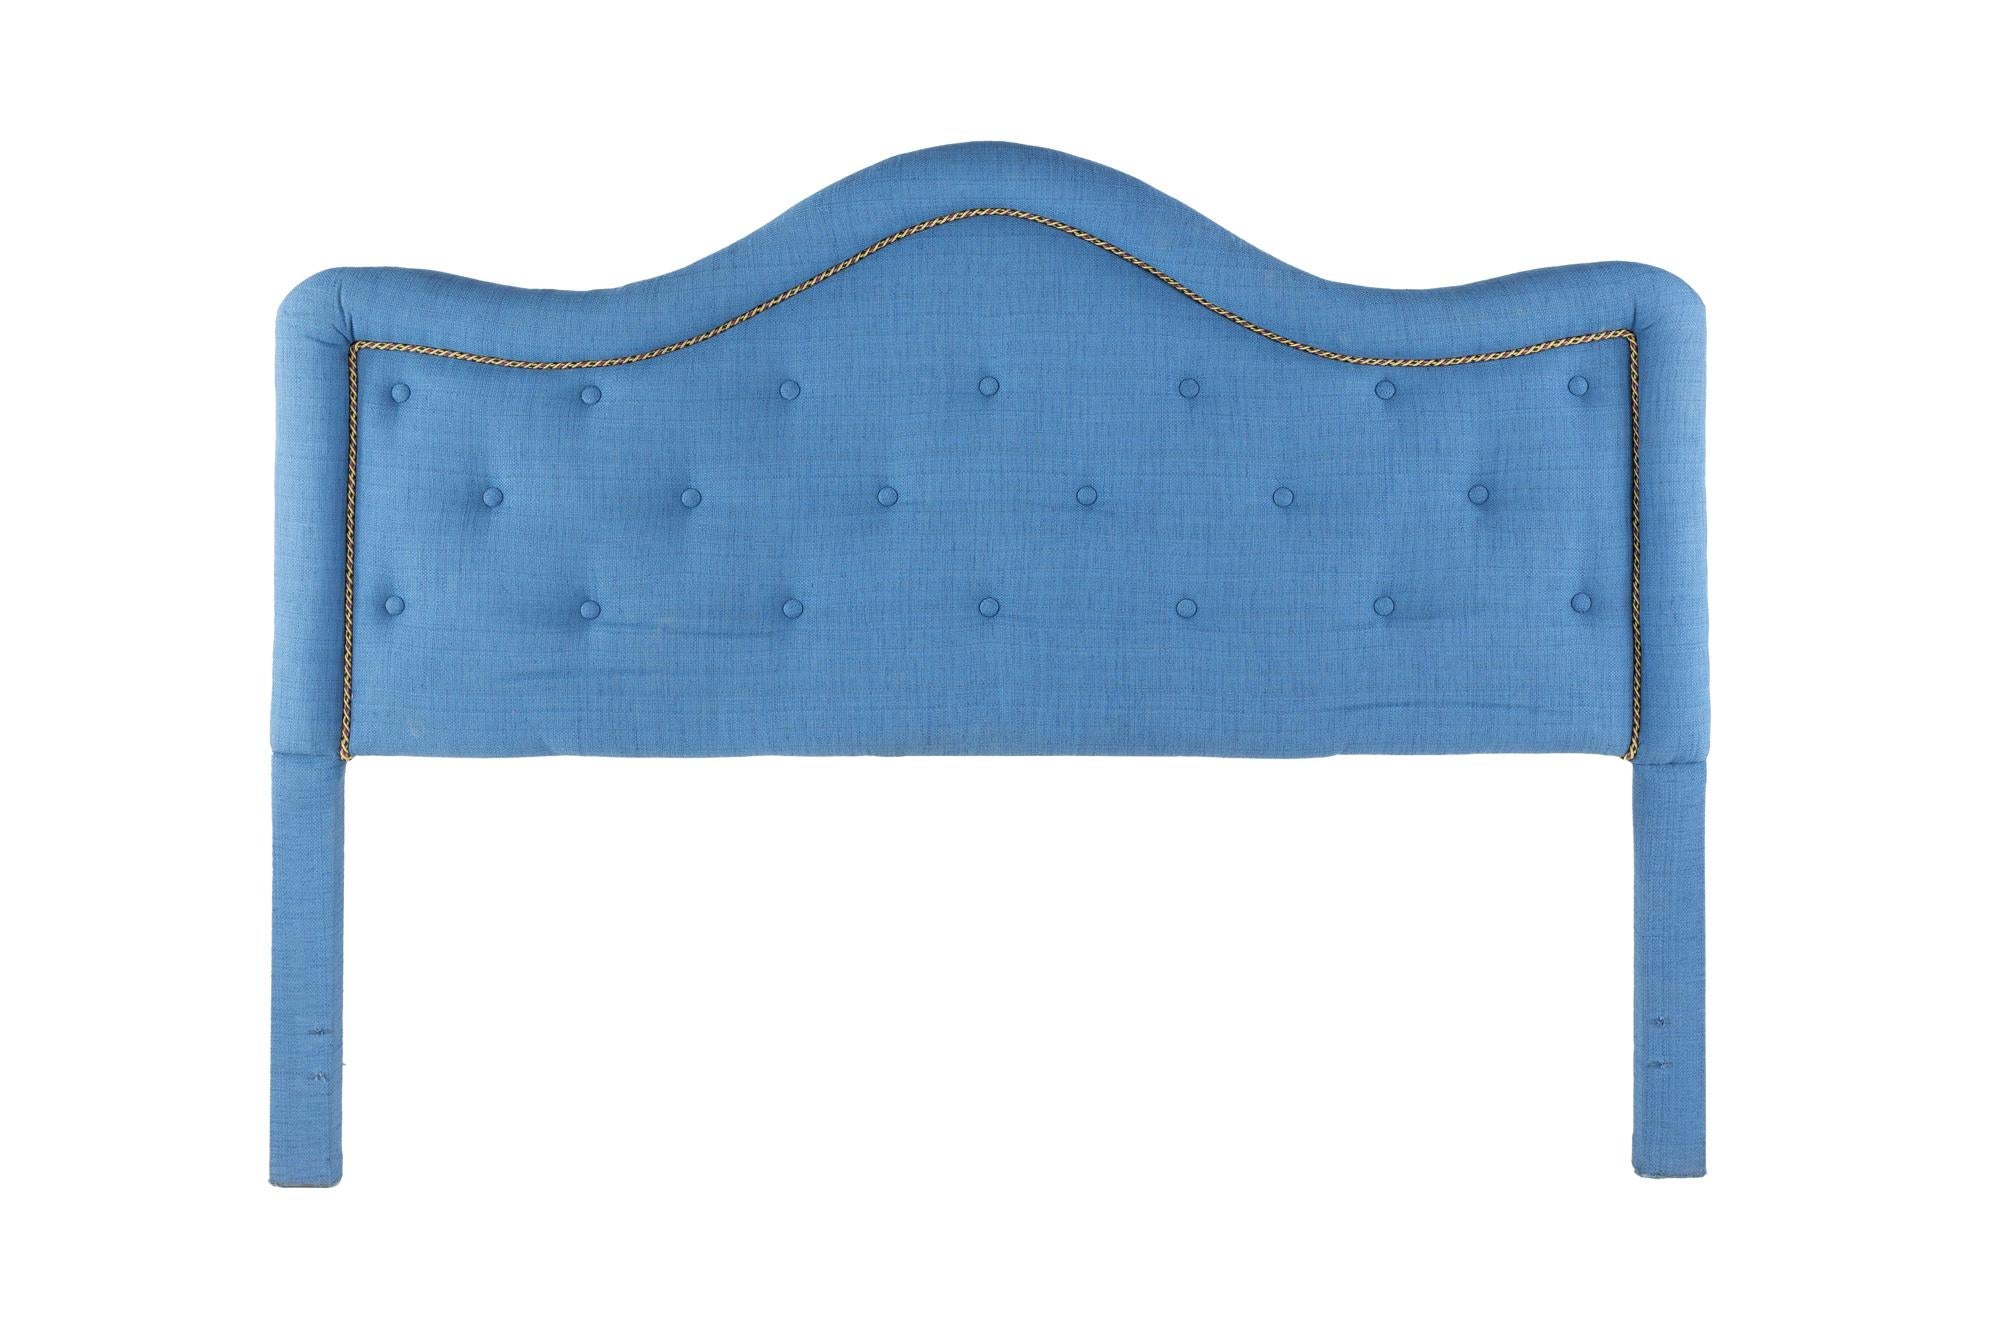 Upholstered Tufted Blue King Headboard

This headboard measures: 79 wide x 3.5 deep x 59 inches high

This headboard is in Good Vintage Condition with some fabric tearing on legs, minor marks, and wear.

About Photos: We take our photos in a